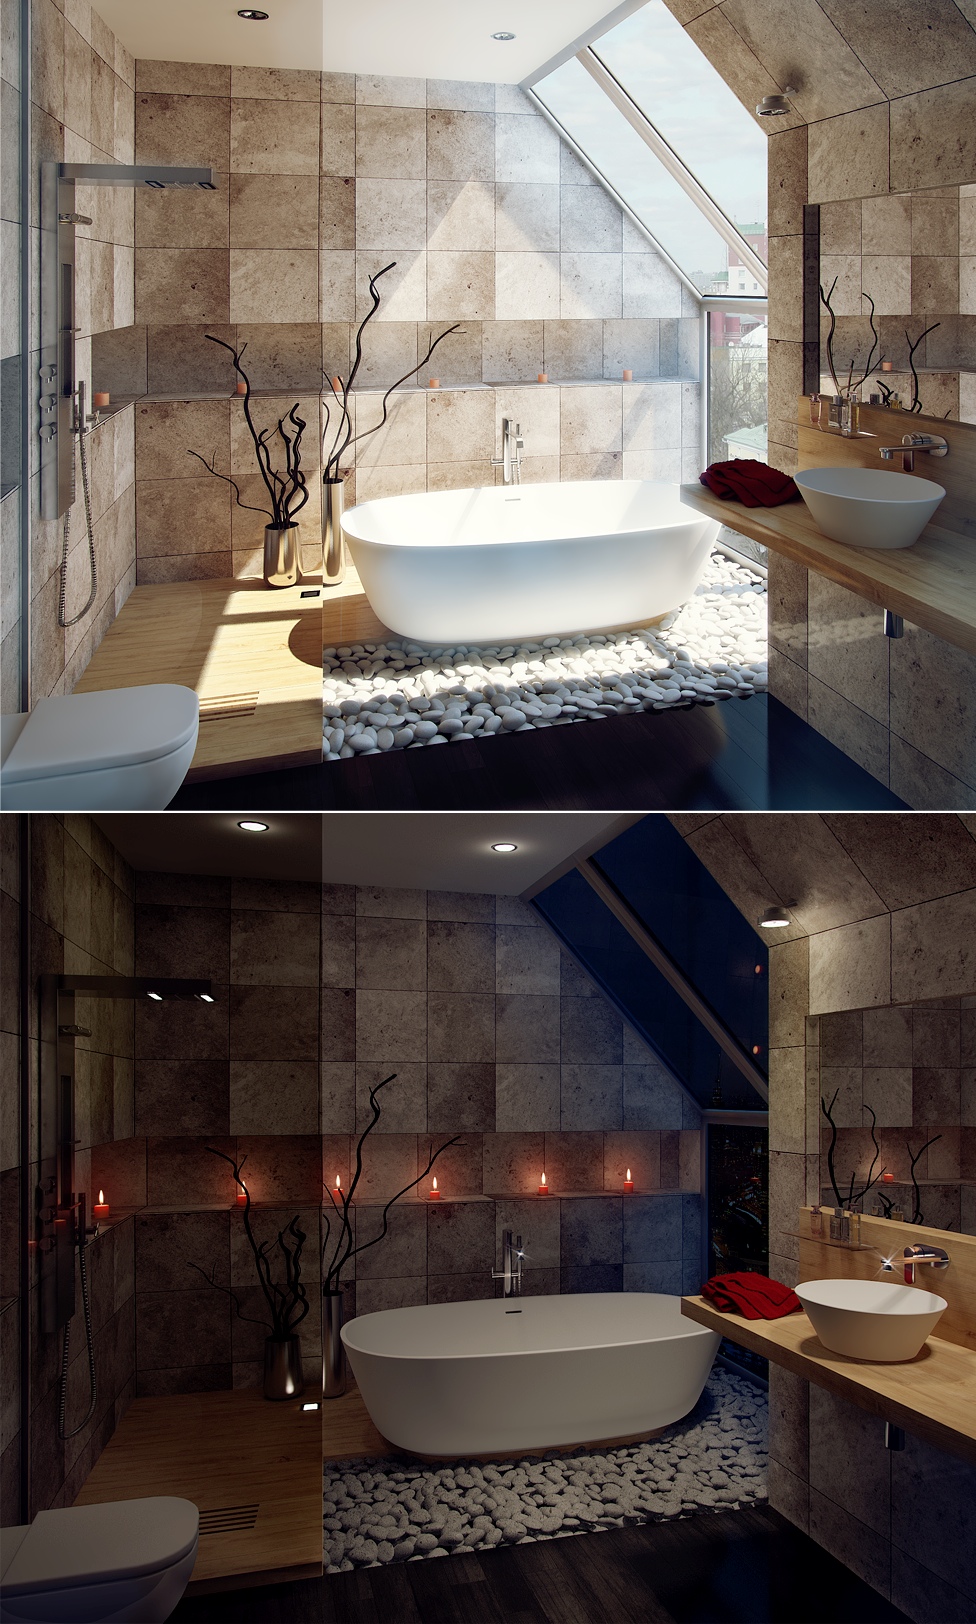 Bathroom design with great views "width =" 976 "height =" 1624 "srcset =" https://mileray.com/wp-content/uploads/2020/05/1588515324_776_Contemporary-Bathroom-Design-Ideas-Complete-With-Perfect-Bathtubs-Bring-a.jpg 976w, https: // myfashionos. com / wp-content / uploads / 2016/09 / Oleg-Suzdalev-180x300.jpg 180w, https://mileray.com/wp-content/uploads/2016/09/Oleg-Suzdalev-768x1278.jpg 768w, https: //mileray.com/wp-content/uploads/2016/09/Oleg-Suzdalev-615x1024.jpg 615w, https://mileray.com/wp-content/uploads/2016/09/Oleg-Suzdalev-696x1158.jpg 696w, https://mileray.com/wp-content/uploads/2016/09/Oleg-Suzdalev-252x420.jpg 252w "Sizes =" (maximum width: 976px) 100vw, 976px